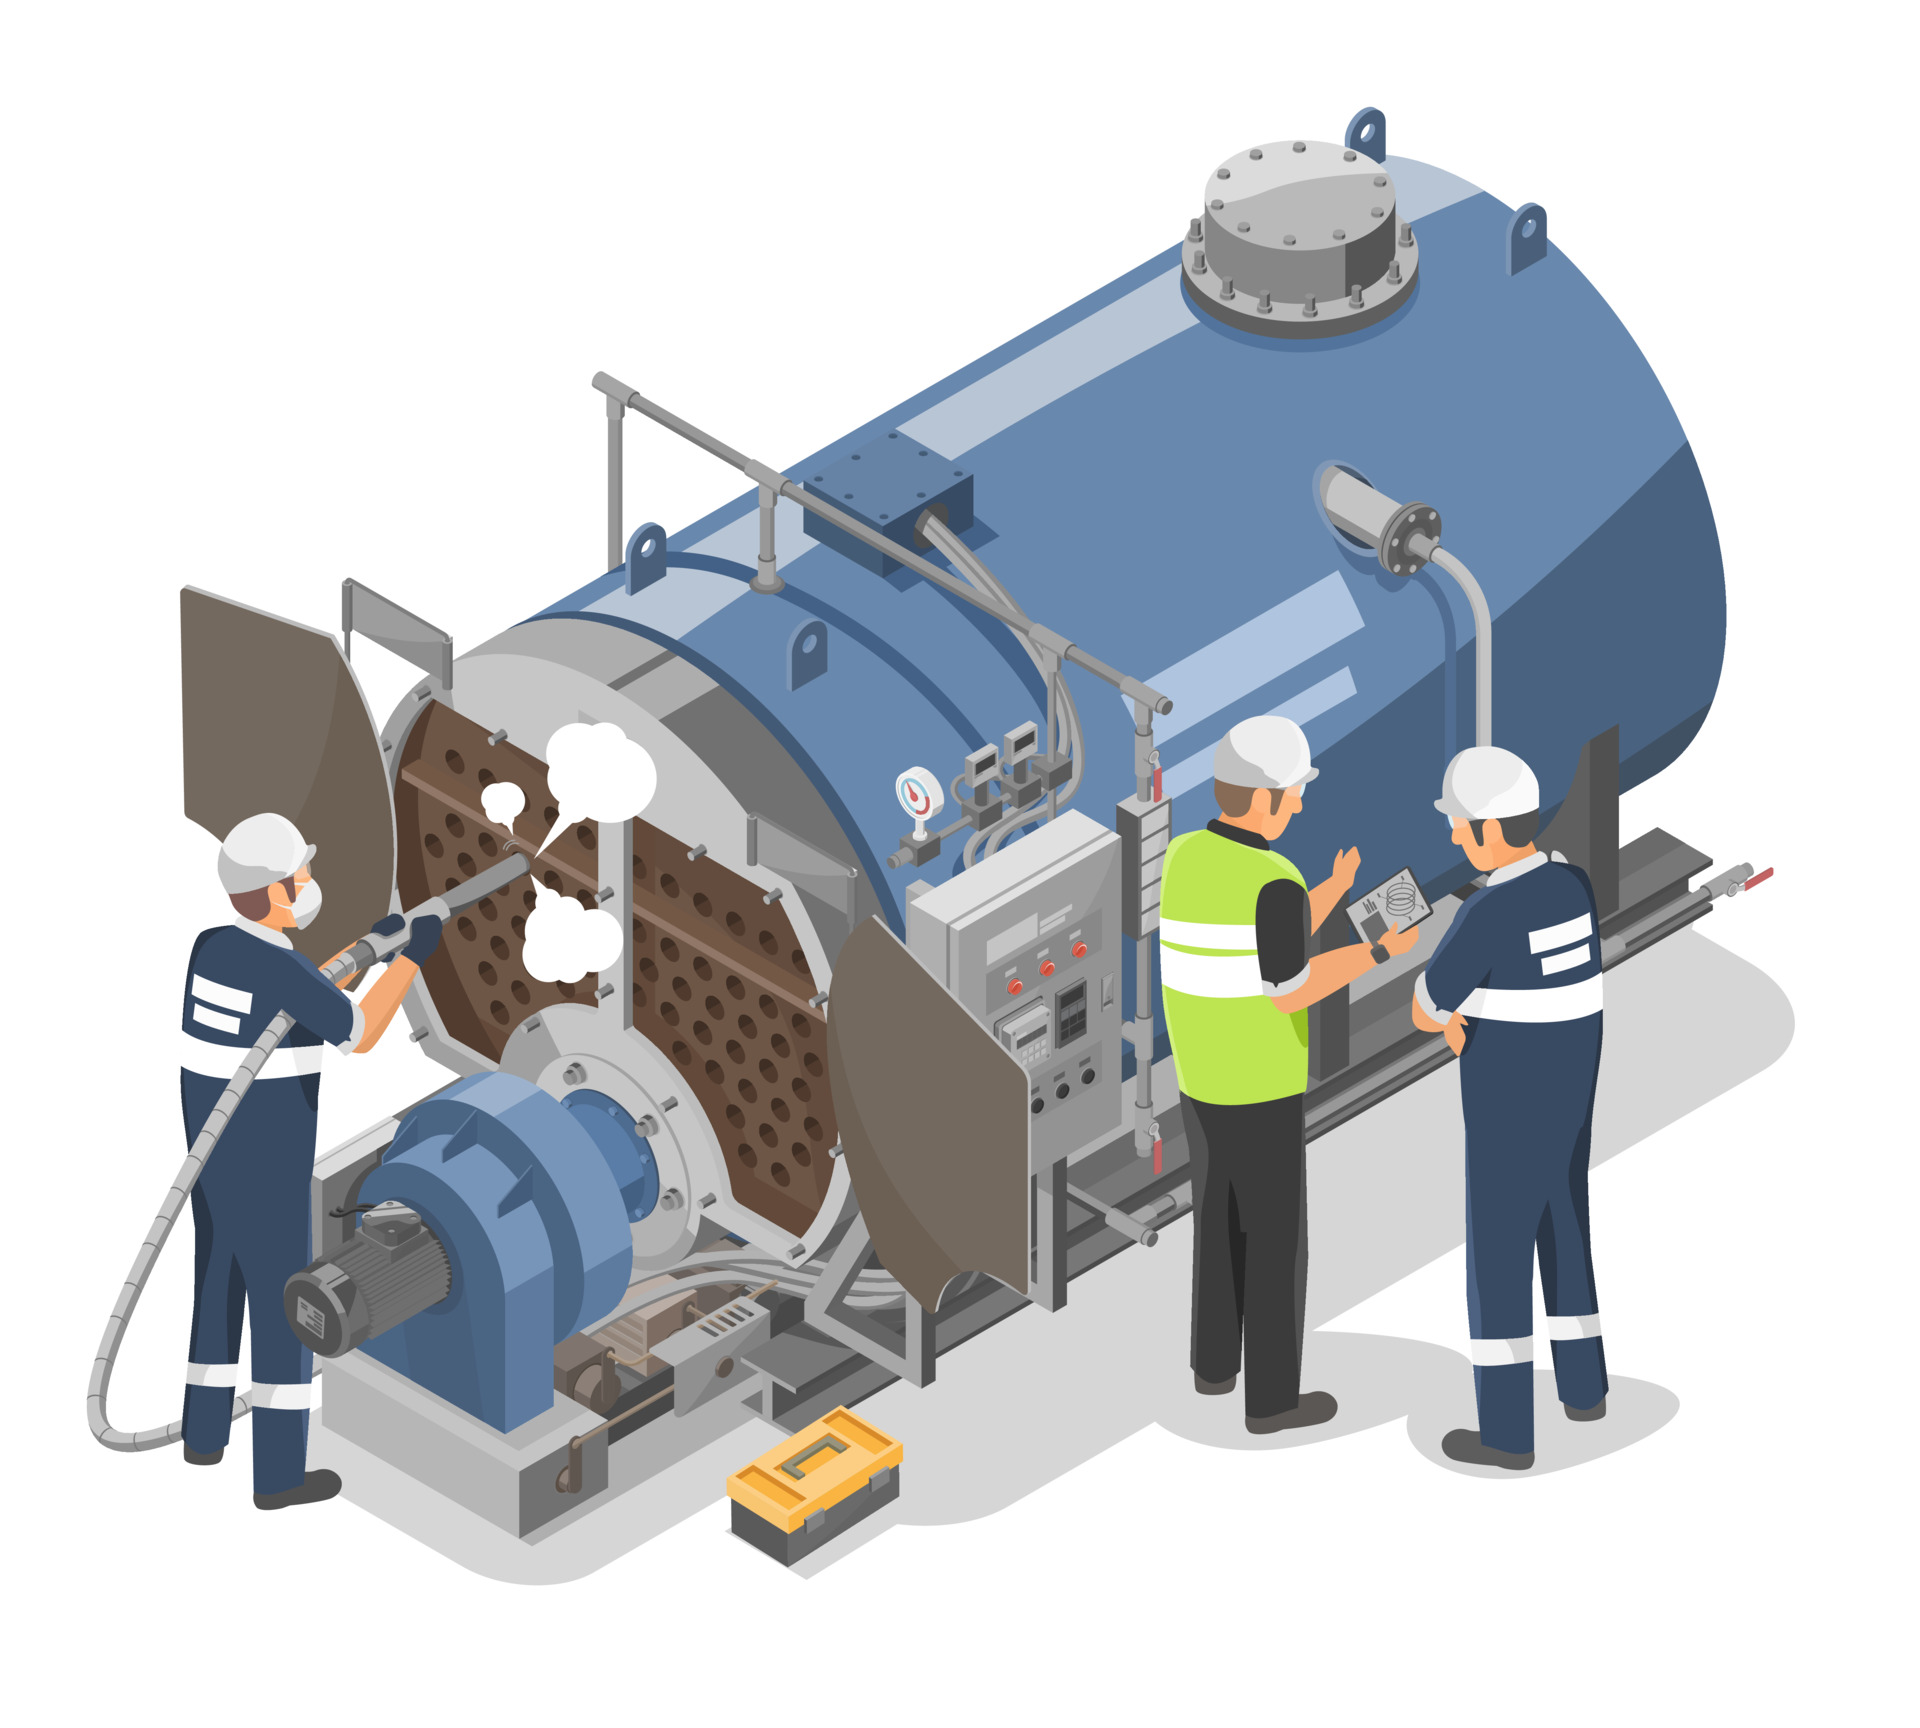 vecteezy_industrial-boiler-cleaning-and-maintenance-and-inspection_17087984